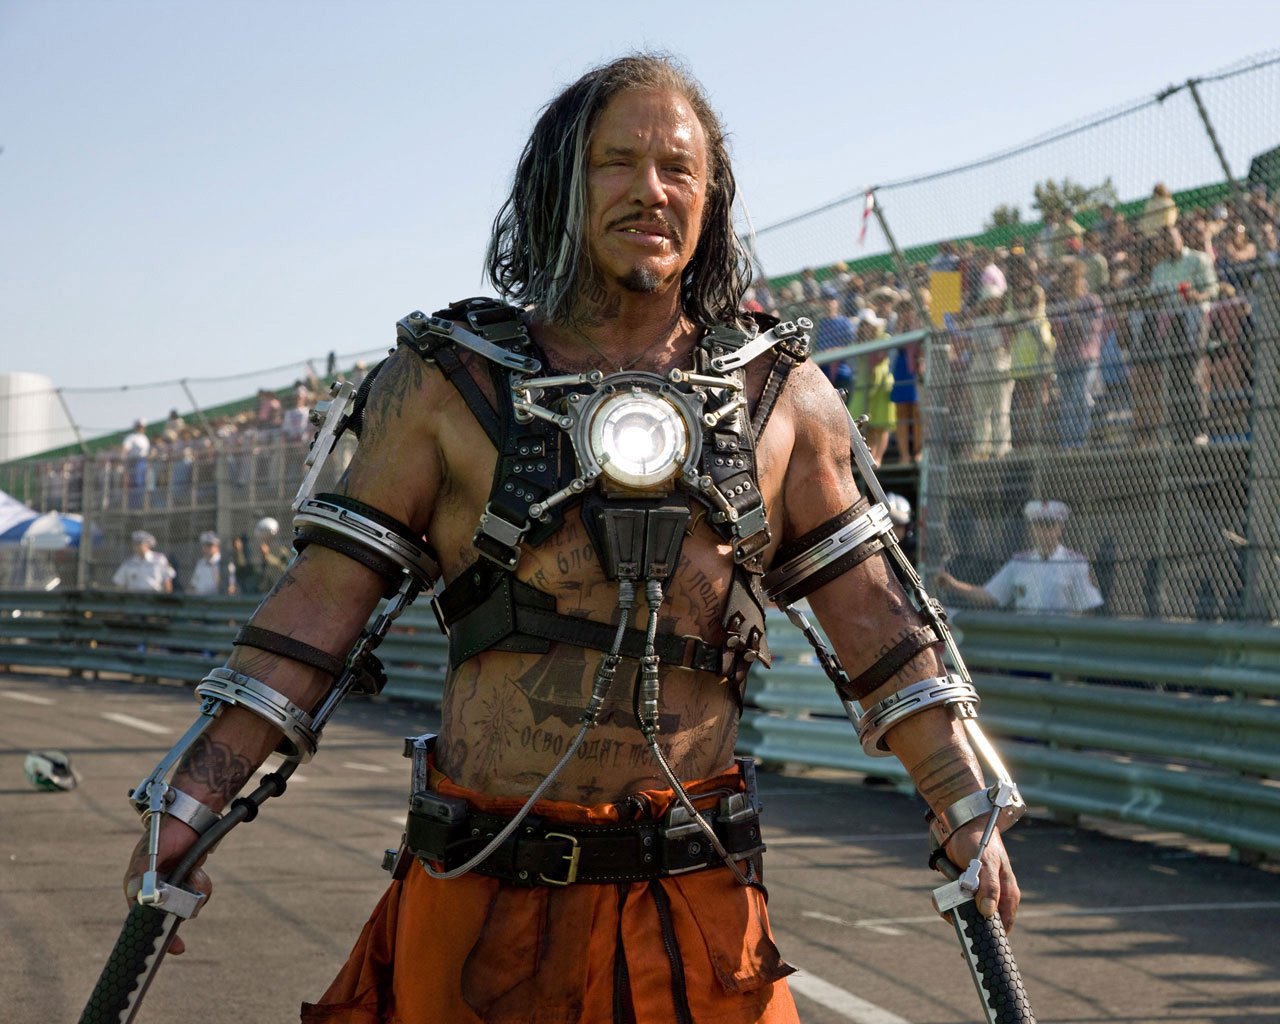 Download High quality Mickey Rourke Iron Man 2 wallpaper / 1280x1024